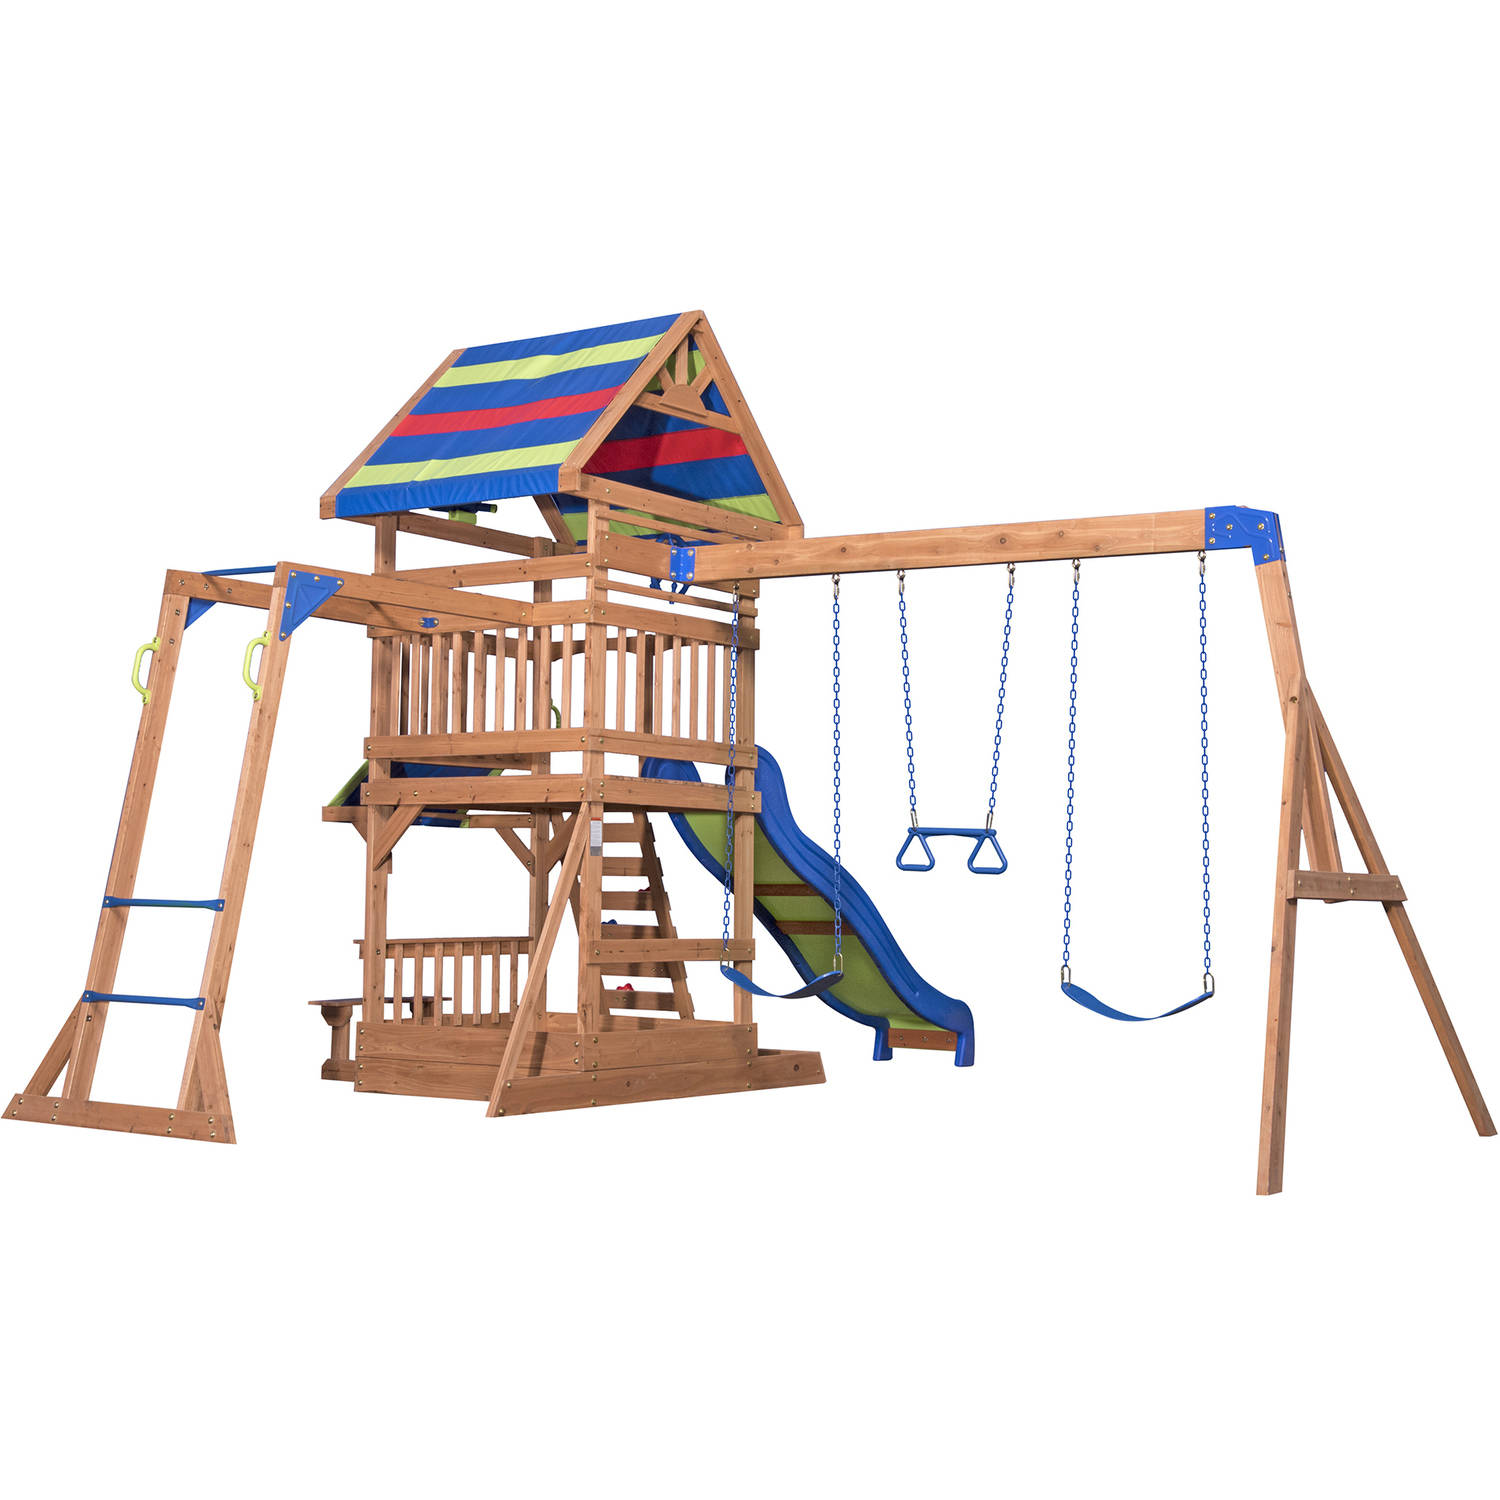 Backyard Discovery Beach Front Wooden Swing Set - image 5 of 12